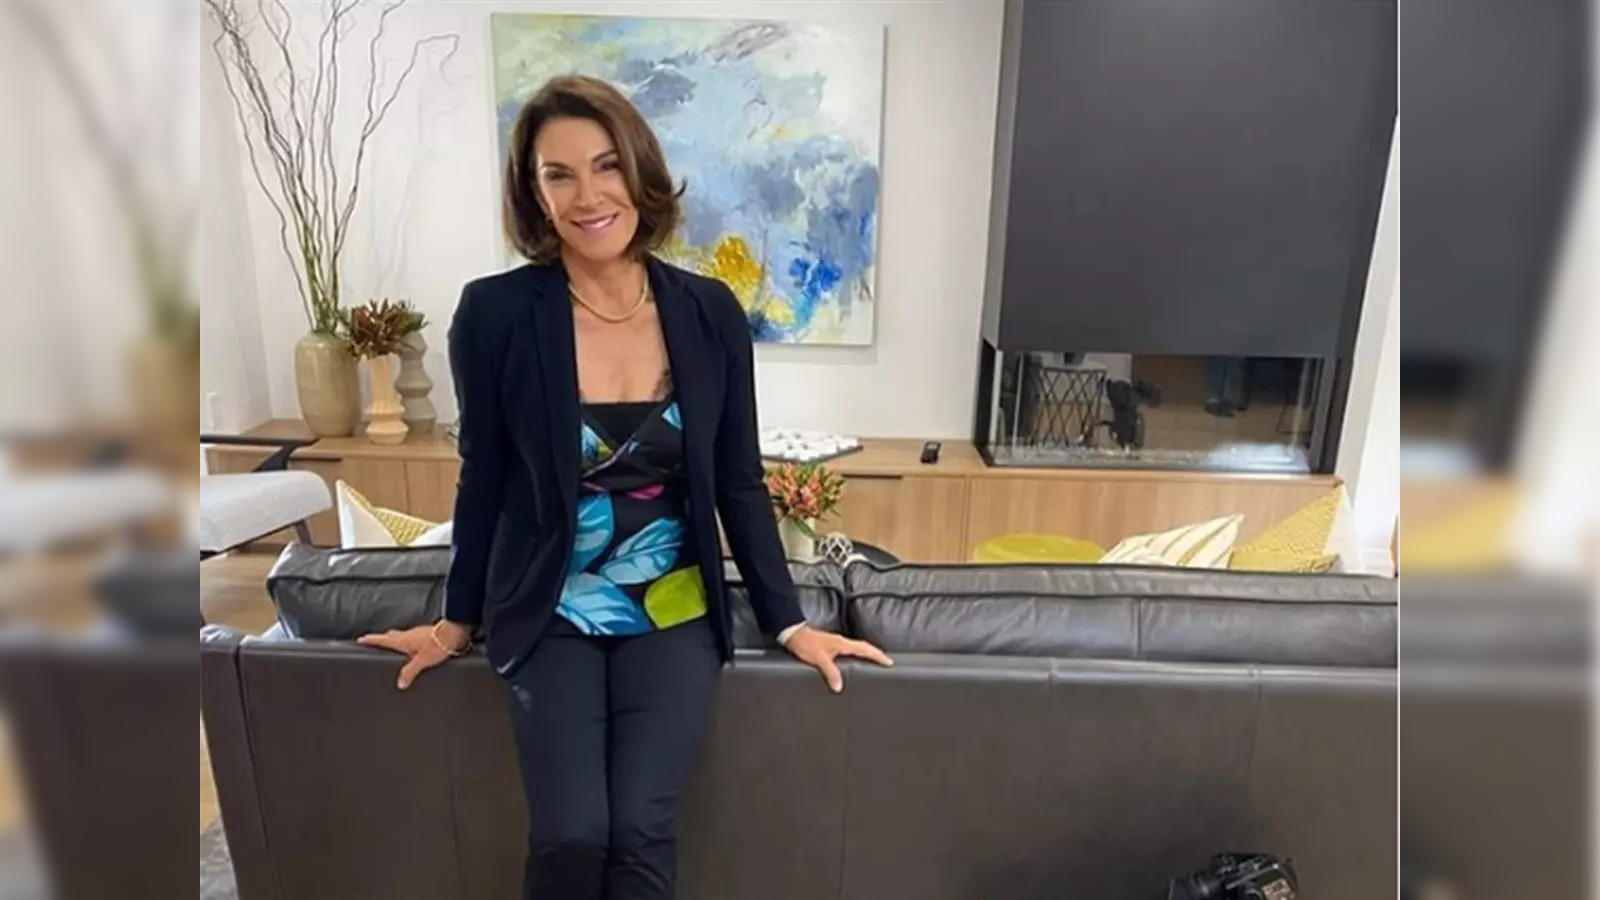 Is Hilary Farr leaving 'Love It or List It' after 19 seasons? - The  Economic Times